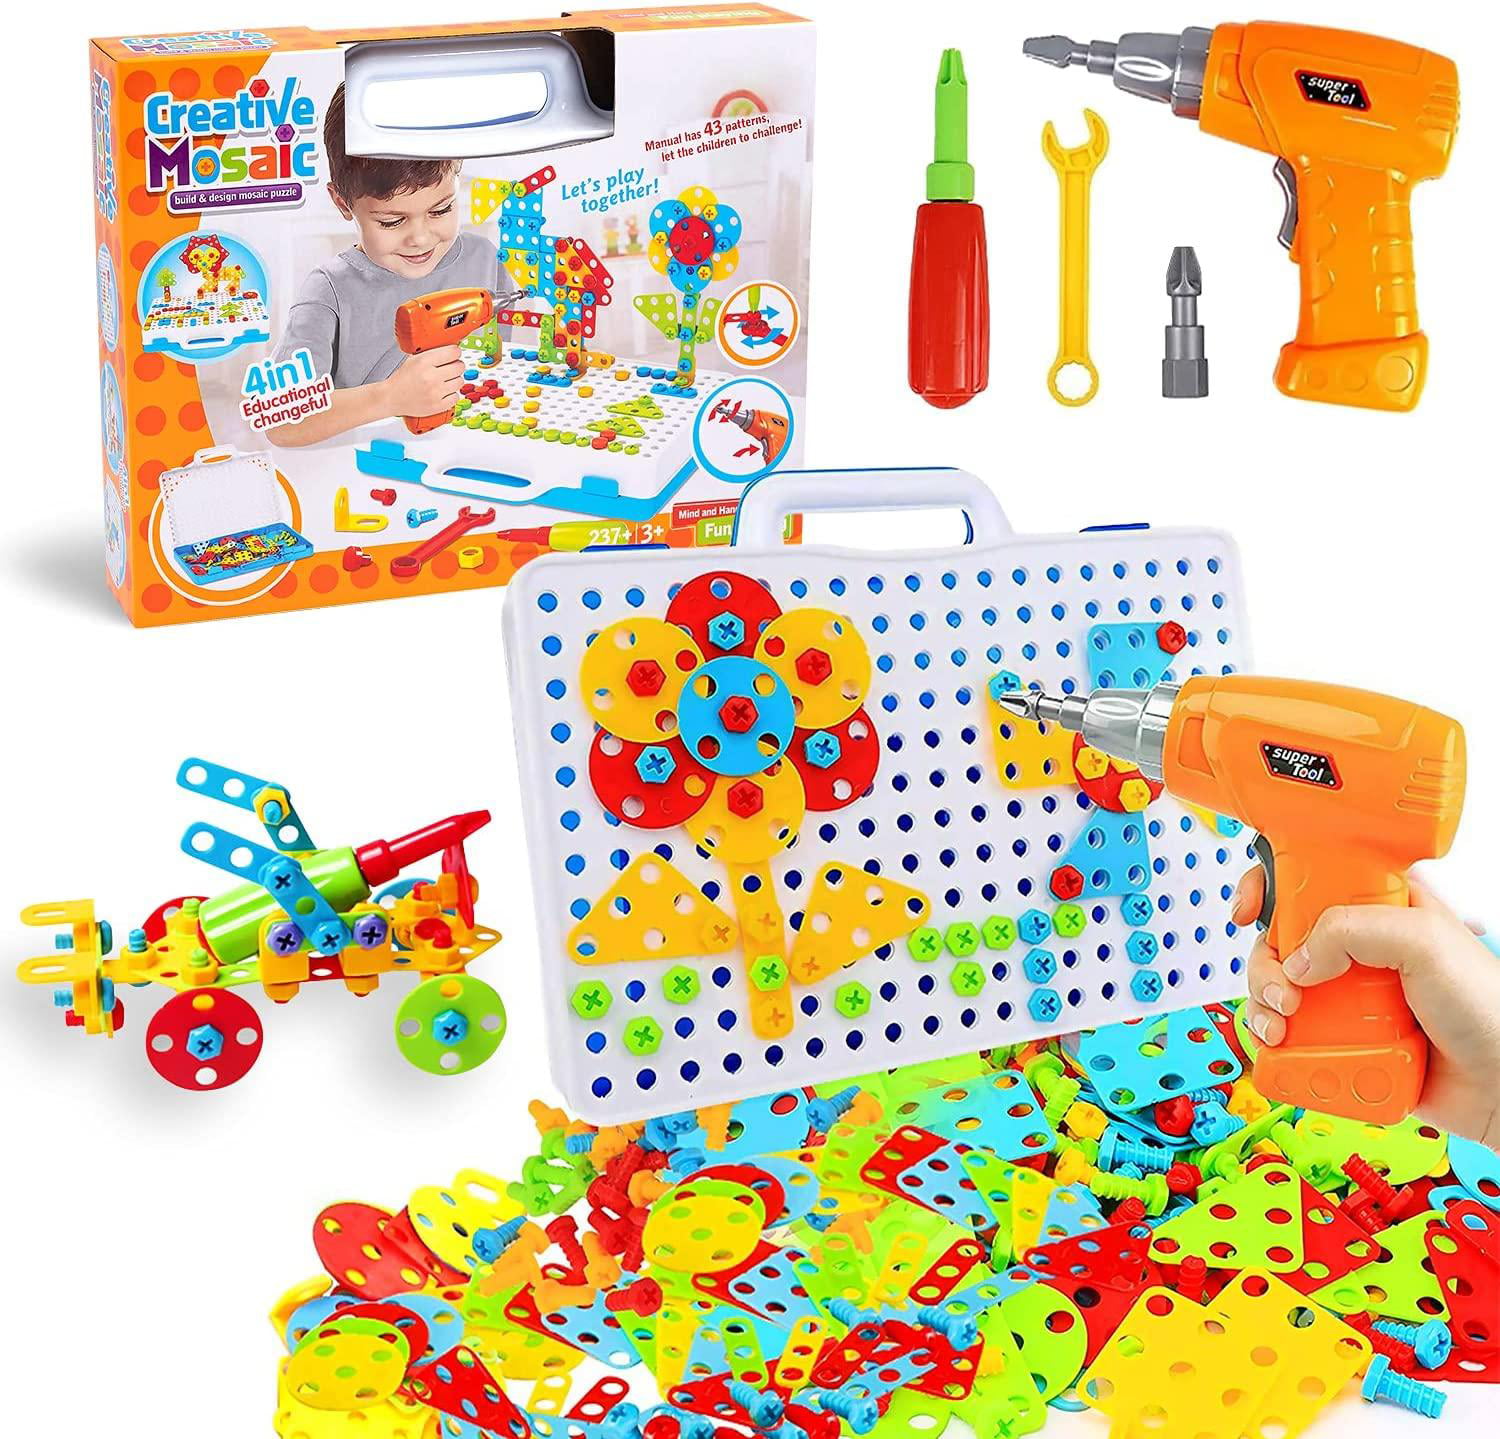 Pcs Electric DIY Mosaic Drill Puzzle Kit STEM Educational Toy for Boy and Girl 5 6 7 8 9 10 Year Old Creative Building Blocks Construction Game Tool Kit 245 